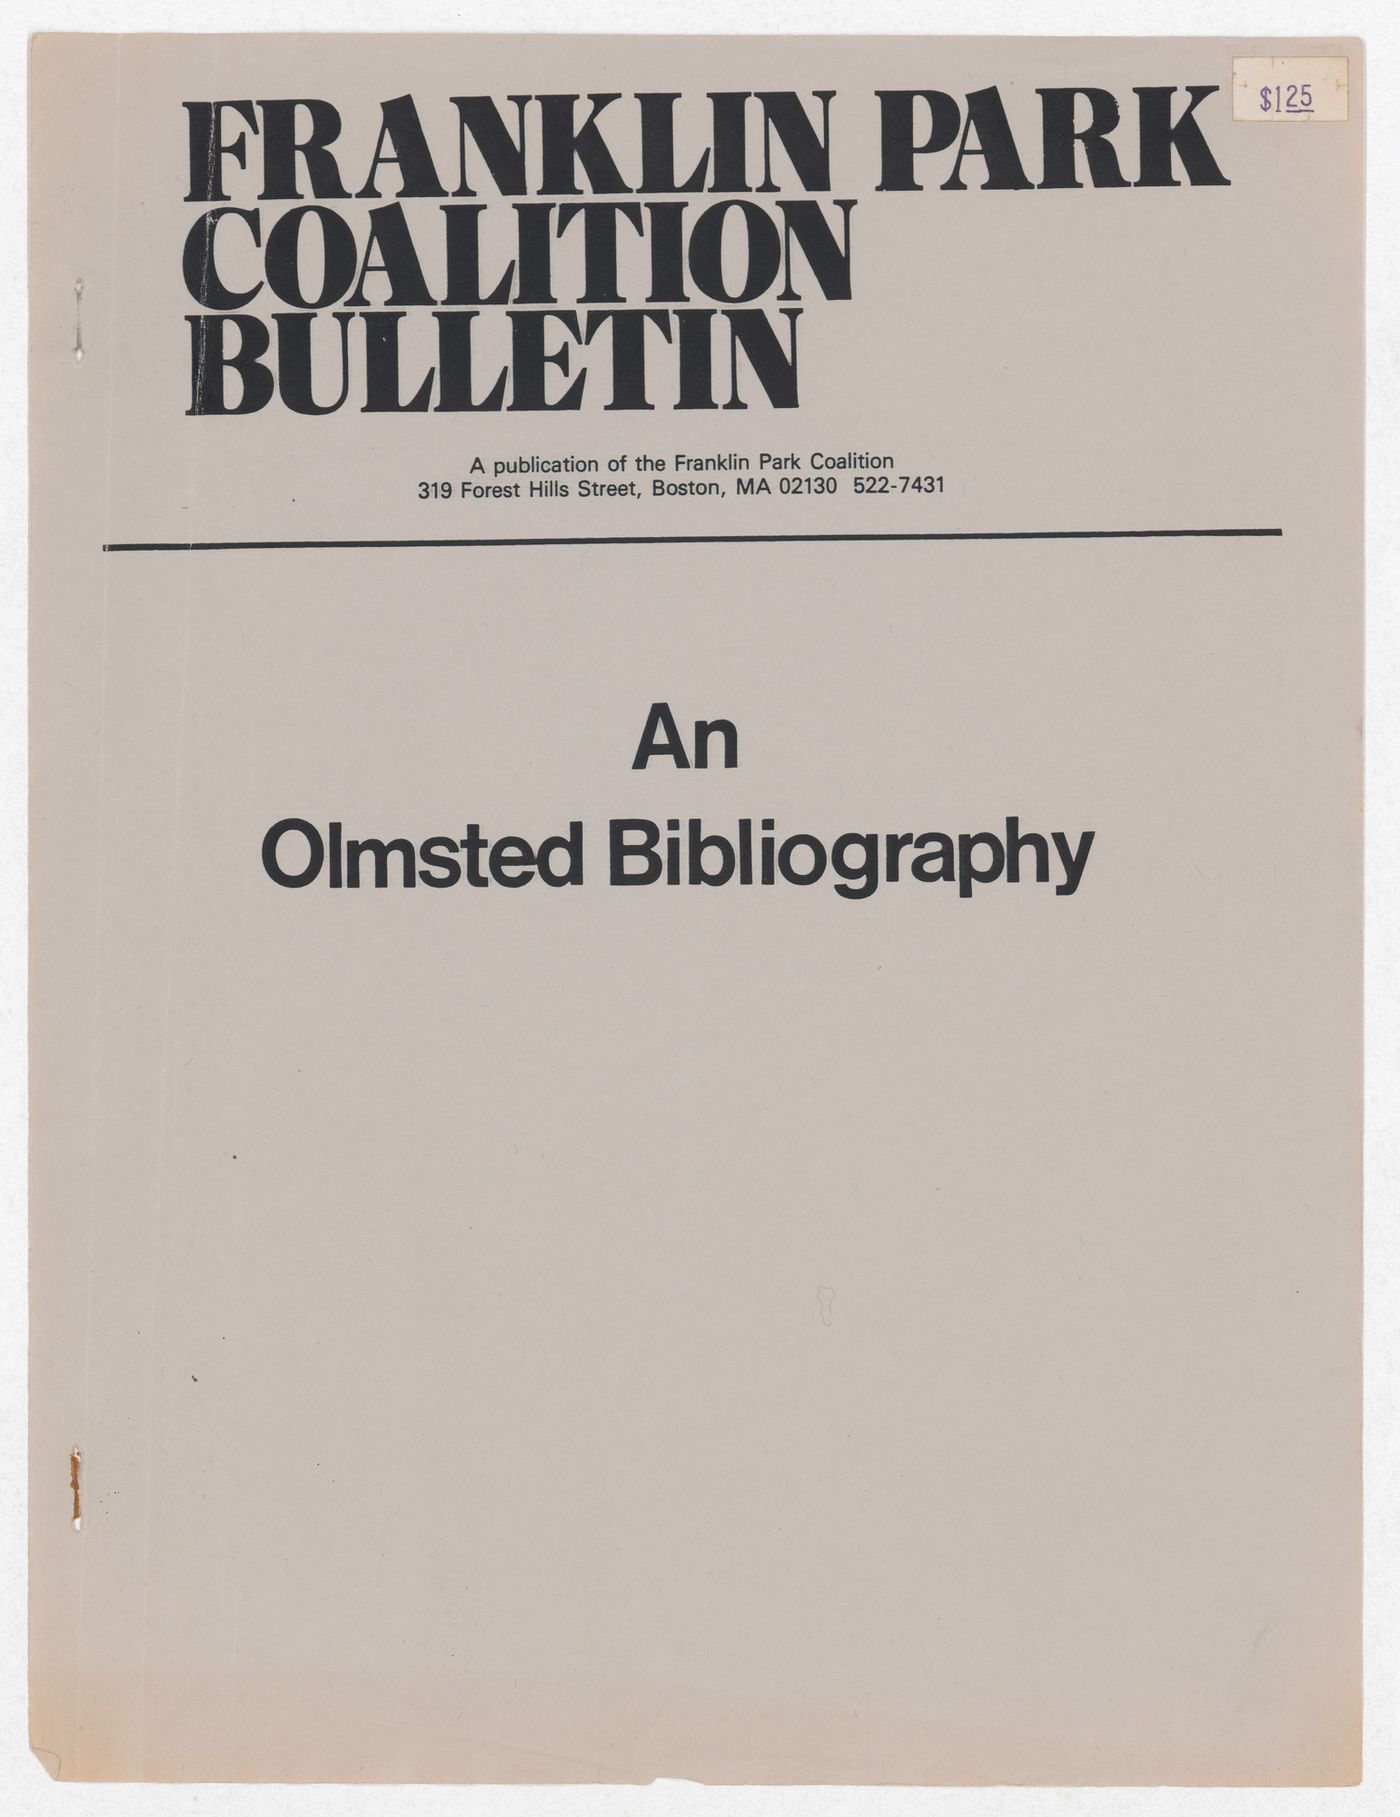 Copy of An Olmsted Bibliography by Franklin Park Coalition Bulletin for the exhibition Olmsted: L'origine del parco urbano e del parco naturale contemporaneo